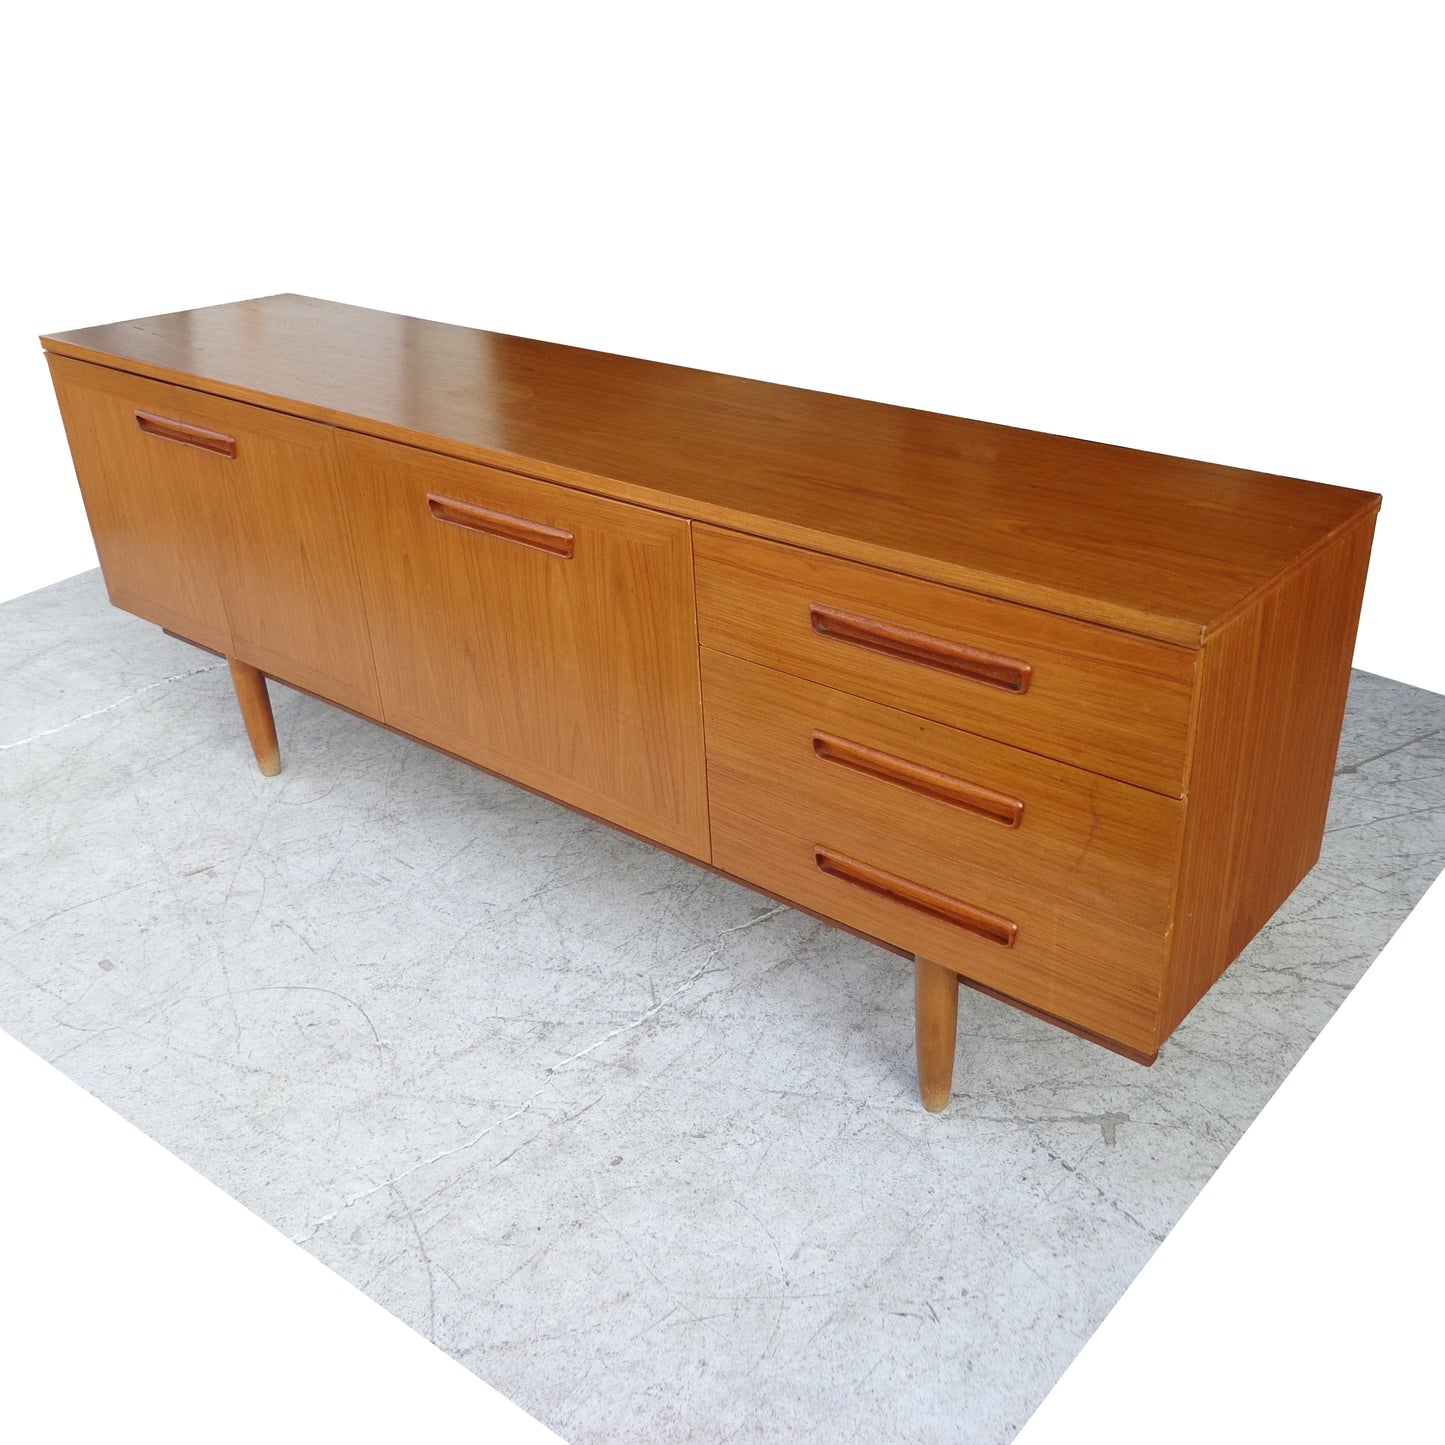 78″ Mid Century Modern Sideboard with Long Folded Handles (MS10088)